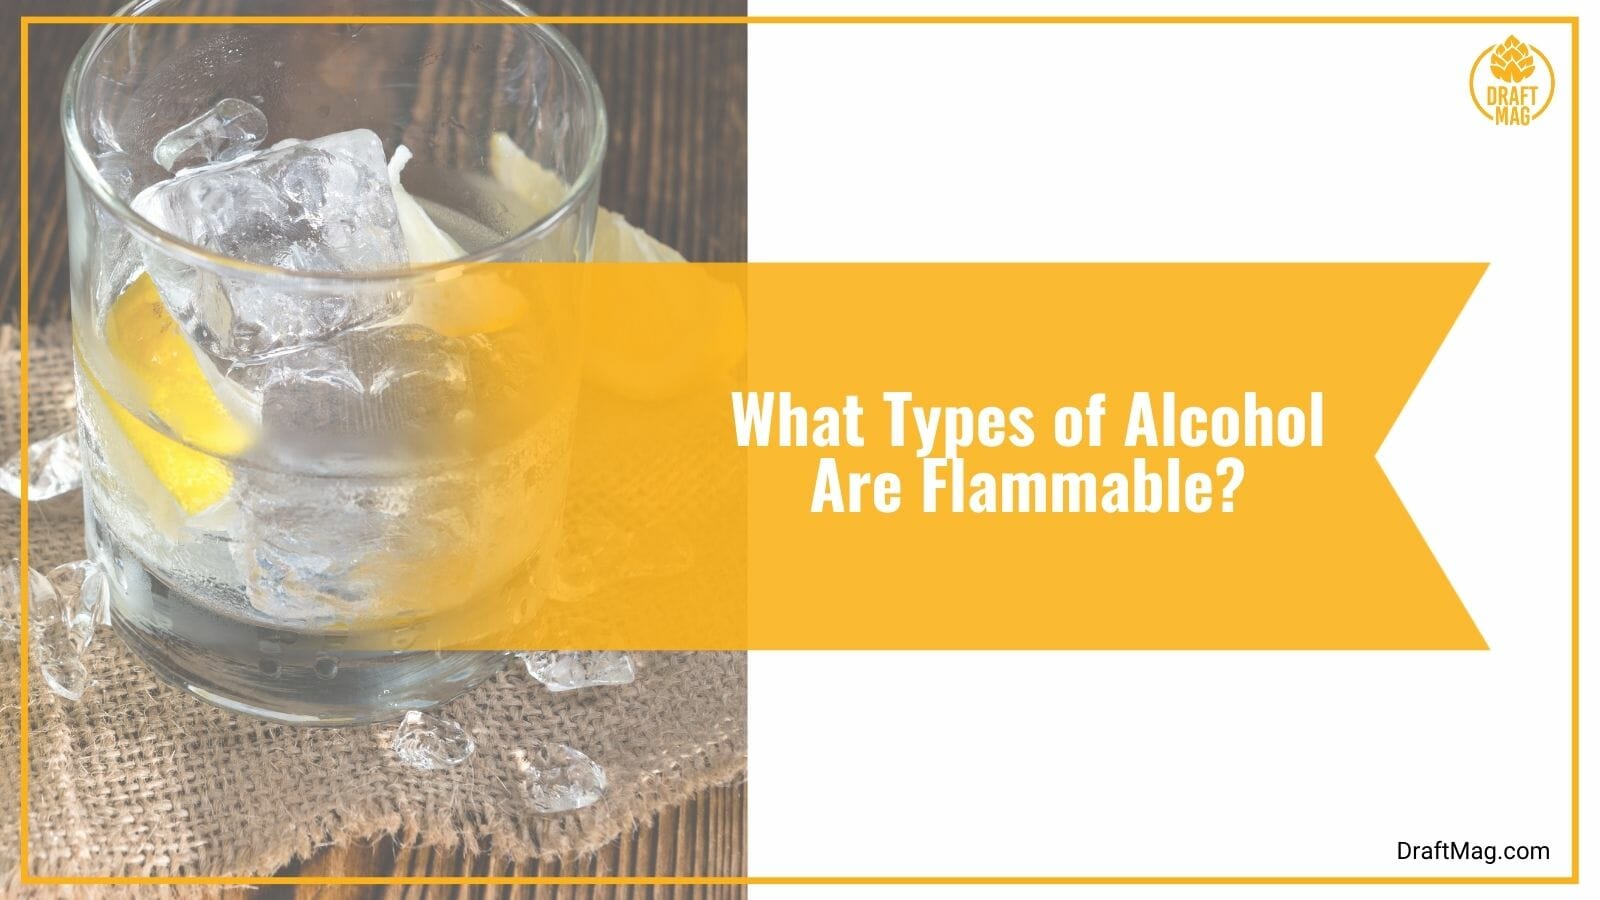 What Types of Alcohol Are Flammable